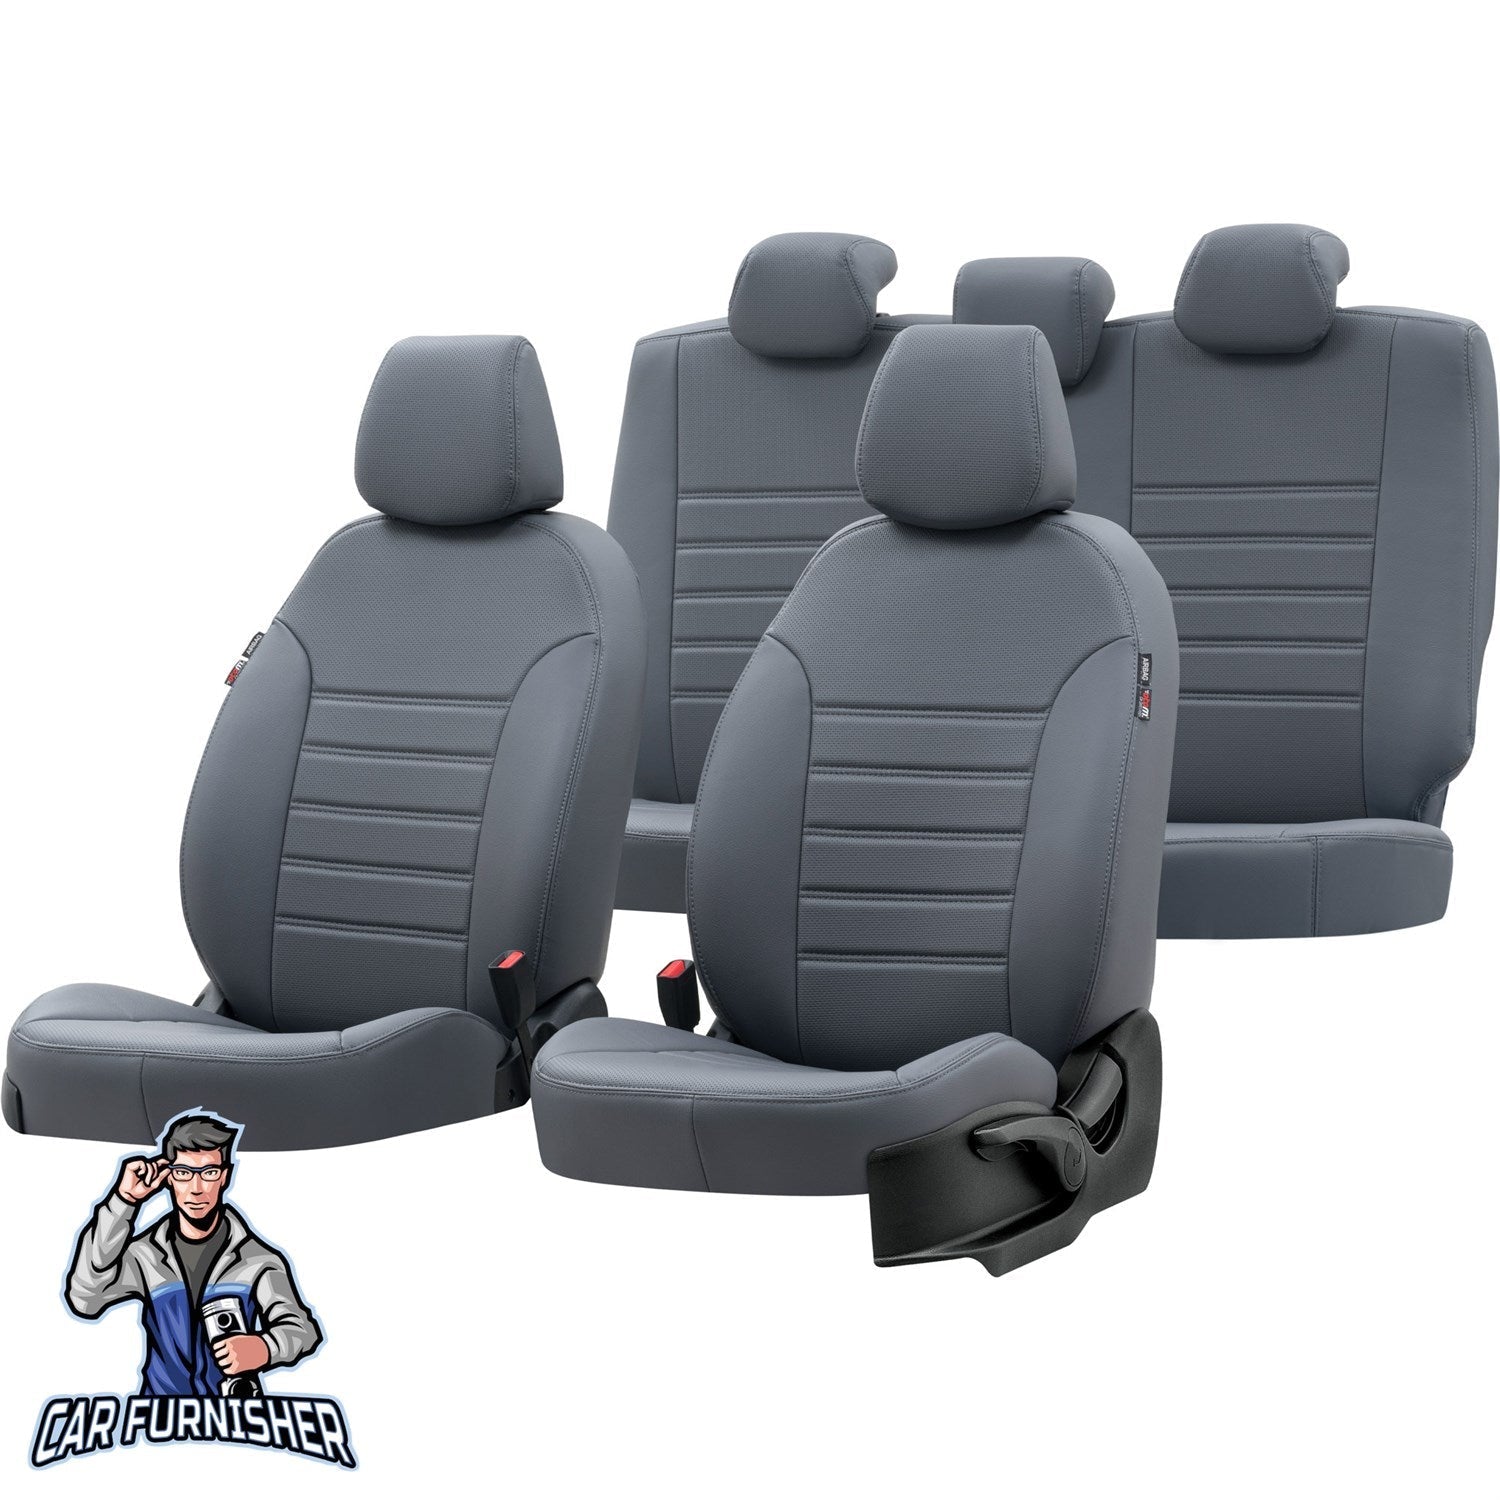 Iveco Eurocargo Seat Cover New York Leather Design Smoked Leather